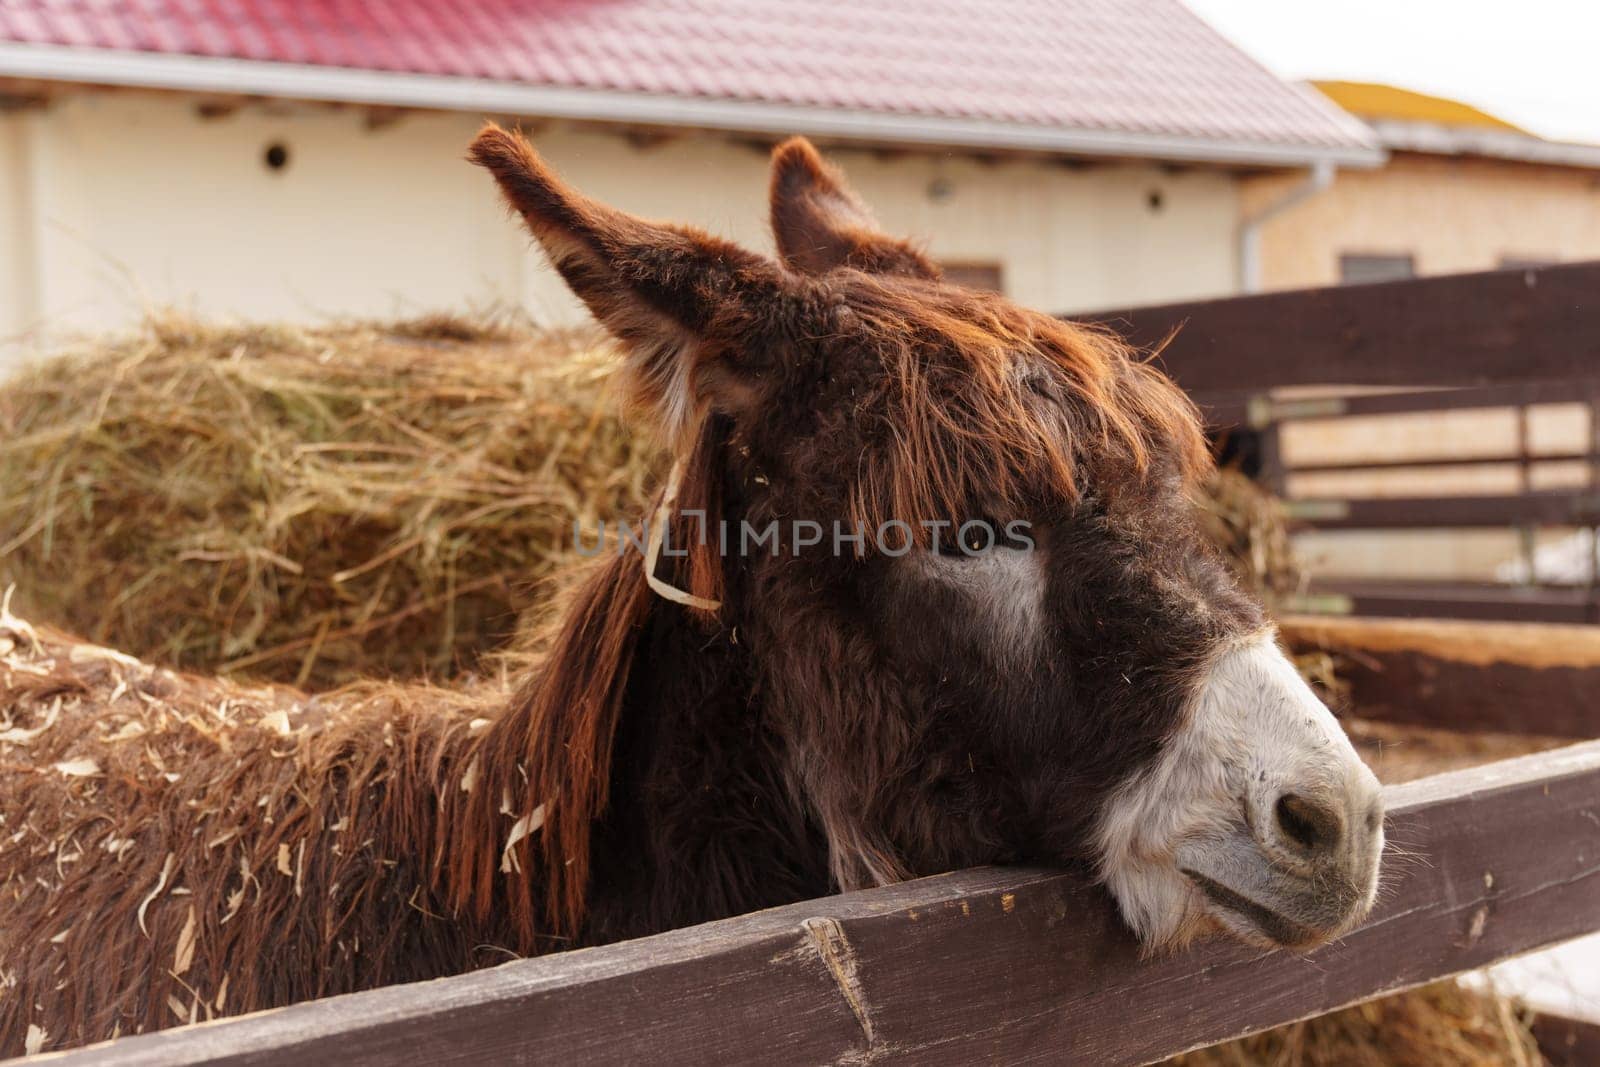 Detailed view of a donkey head as it rests on a wooden farm fence, showcasing the rural agricultural environment.